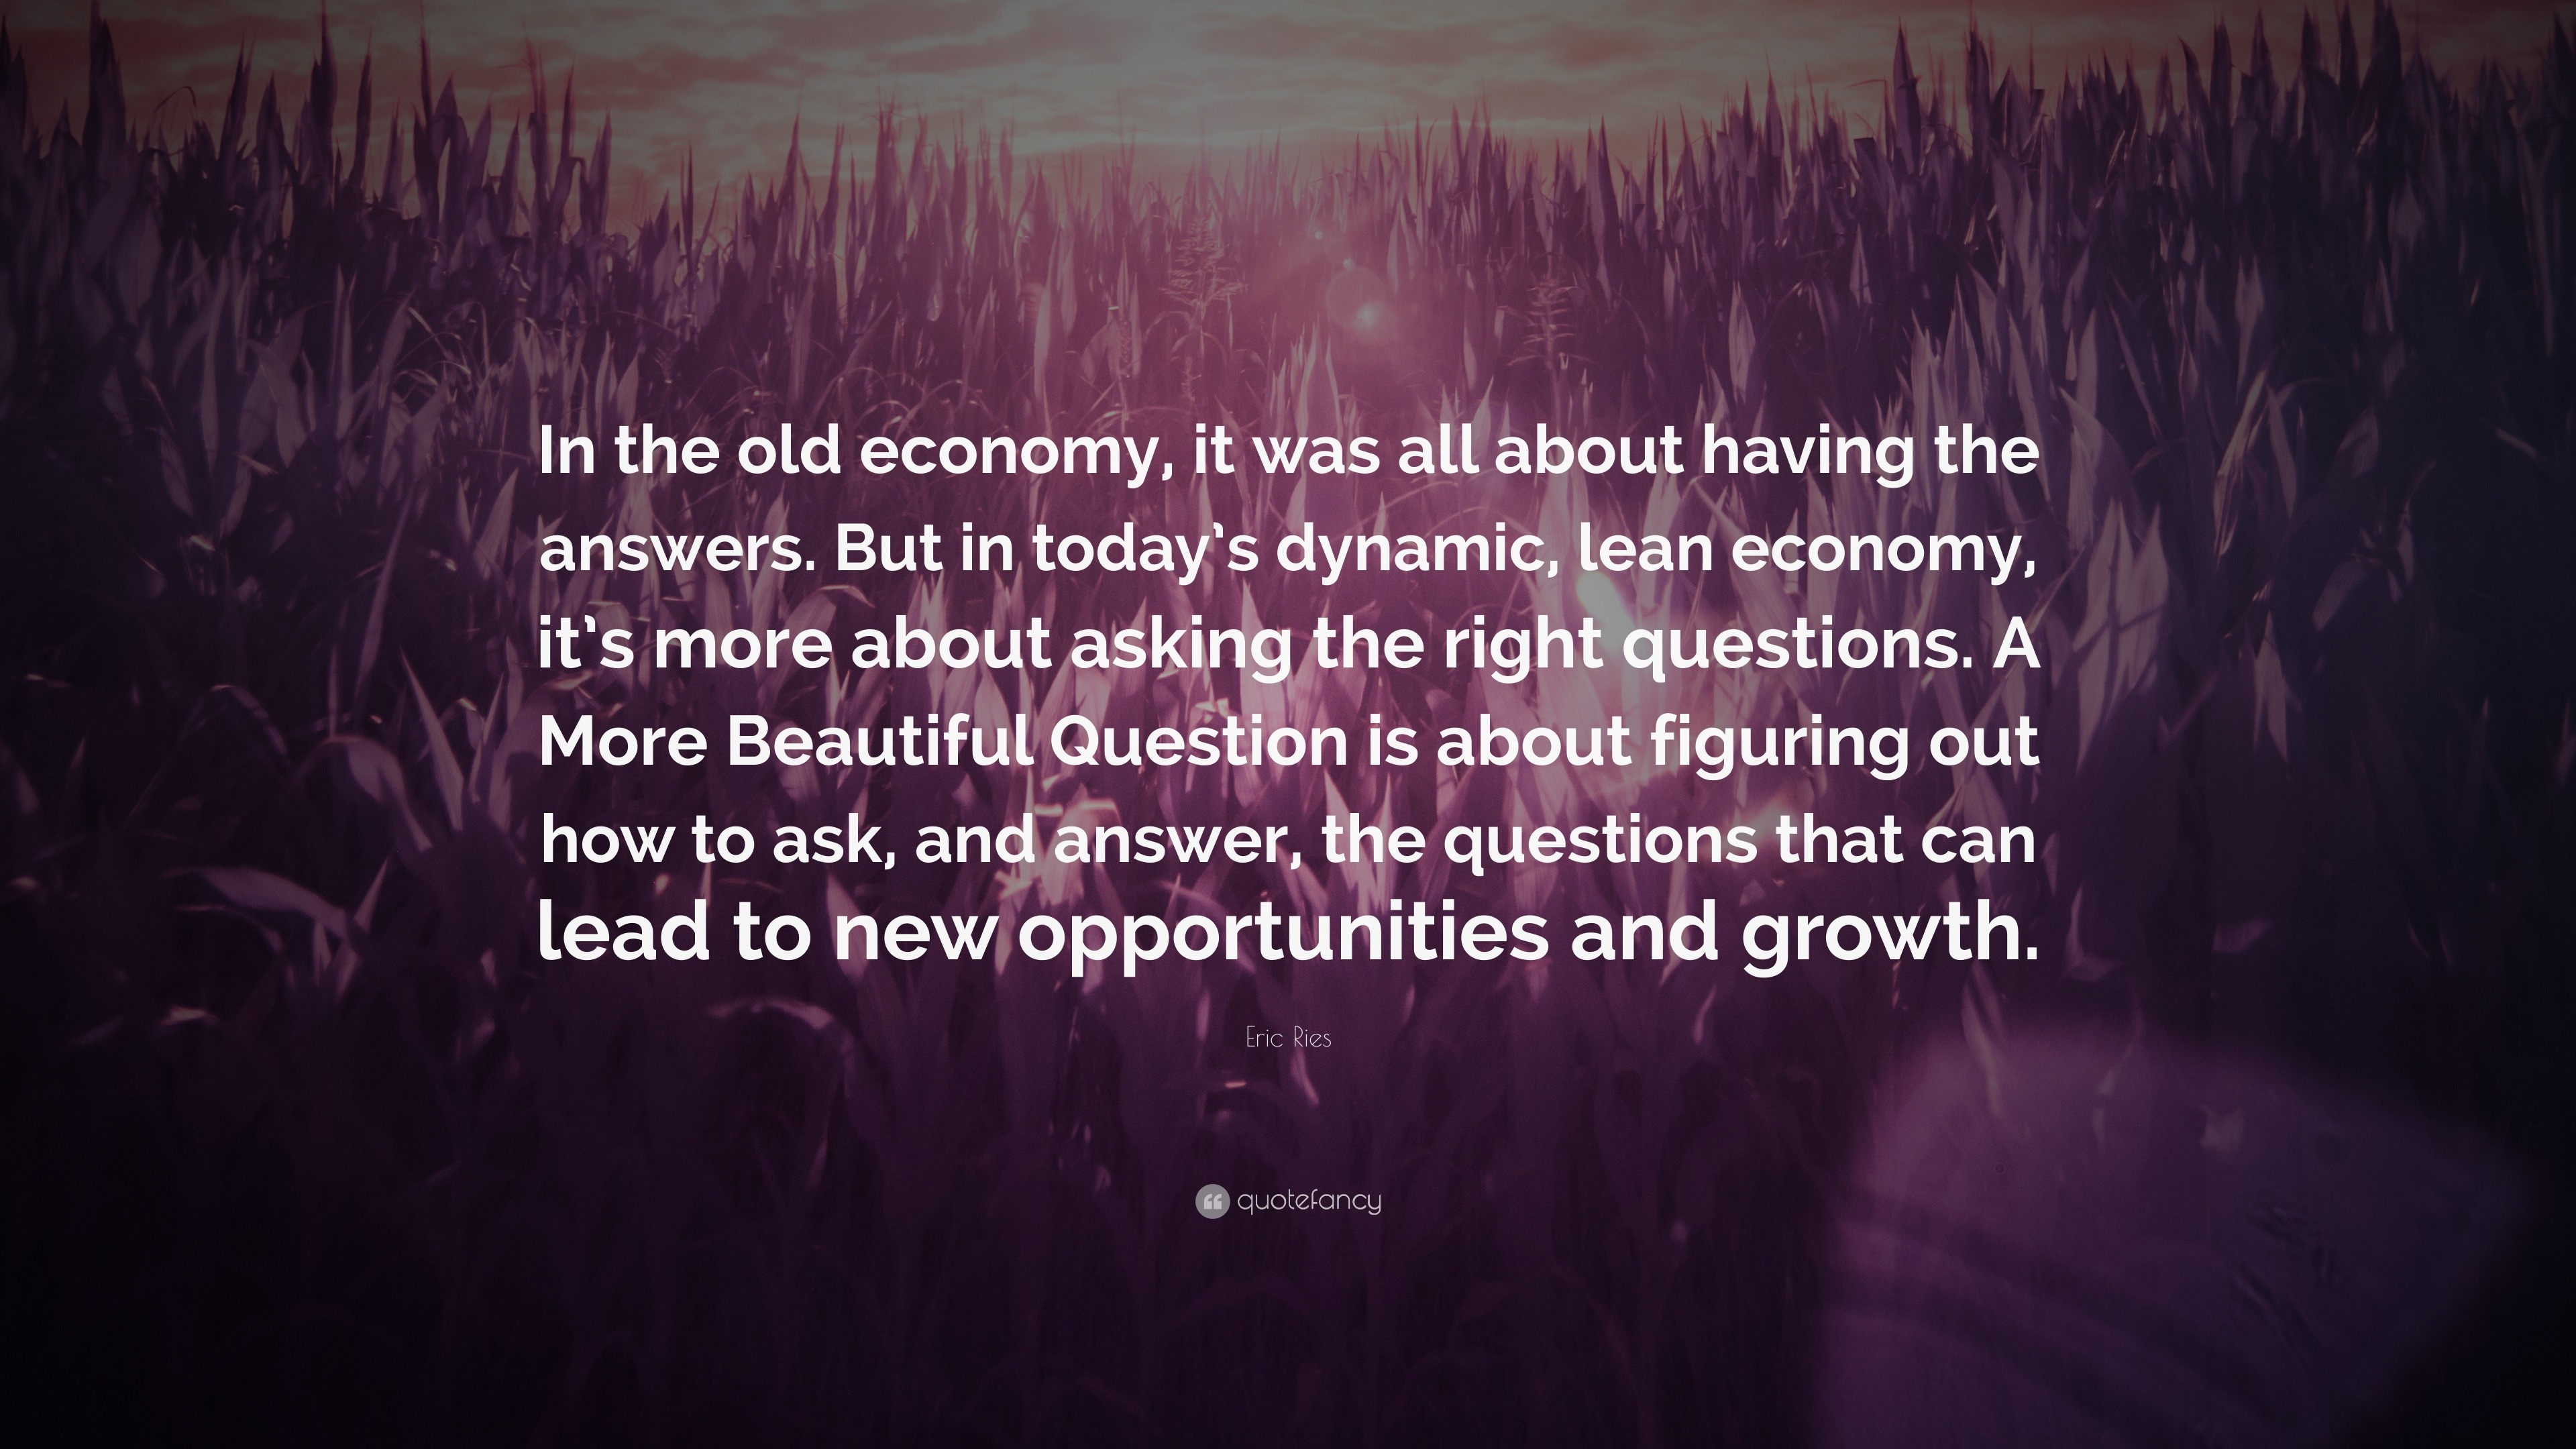 Growth Quotes “In the old economy it was all about having the answers